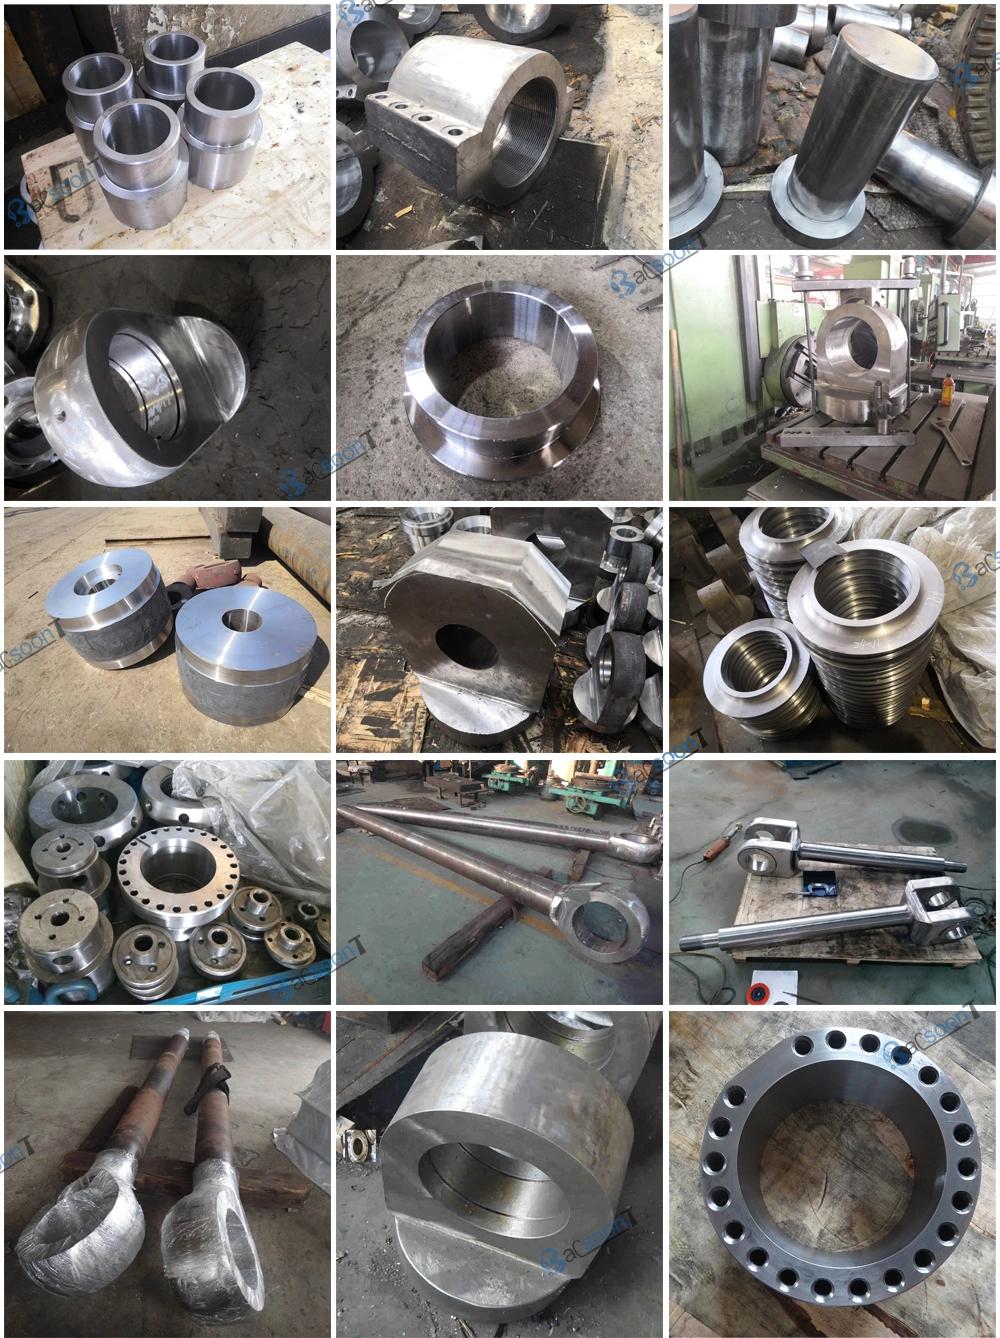 4340/4140/Steel Alloy Heavy/Big Forging/Forged Shaft with Normalizing/Tempering/Induction Harden